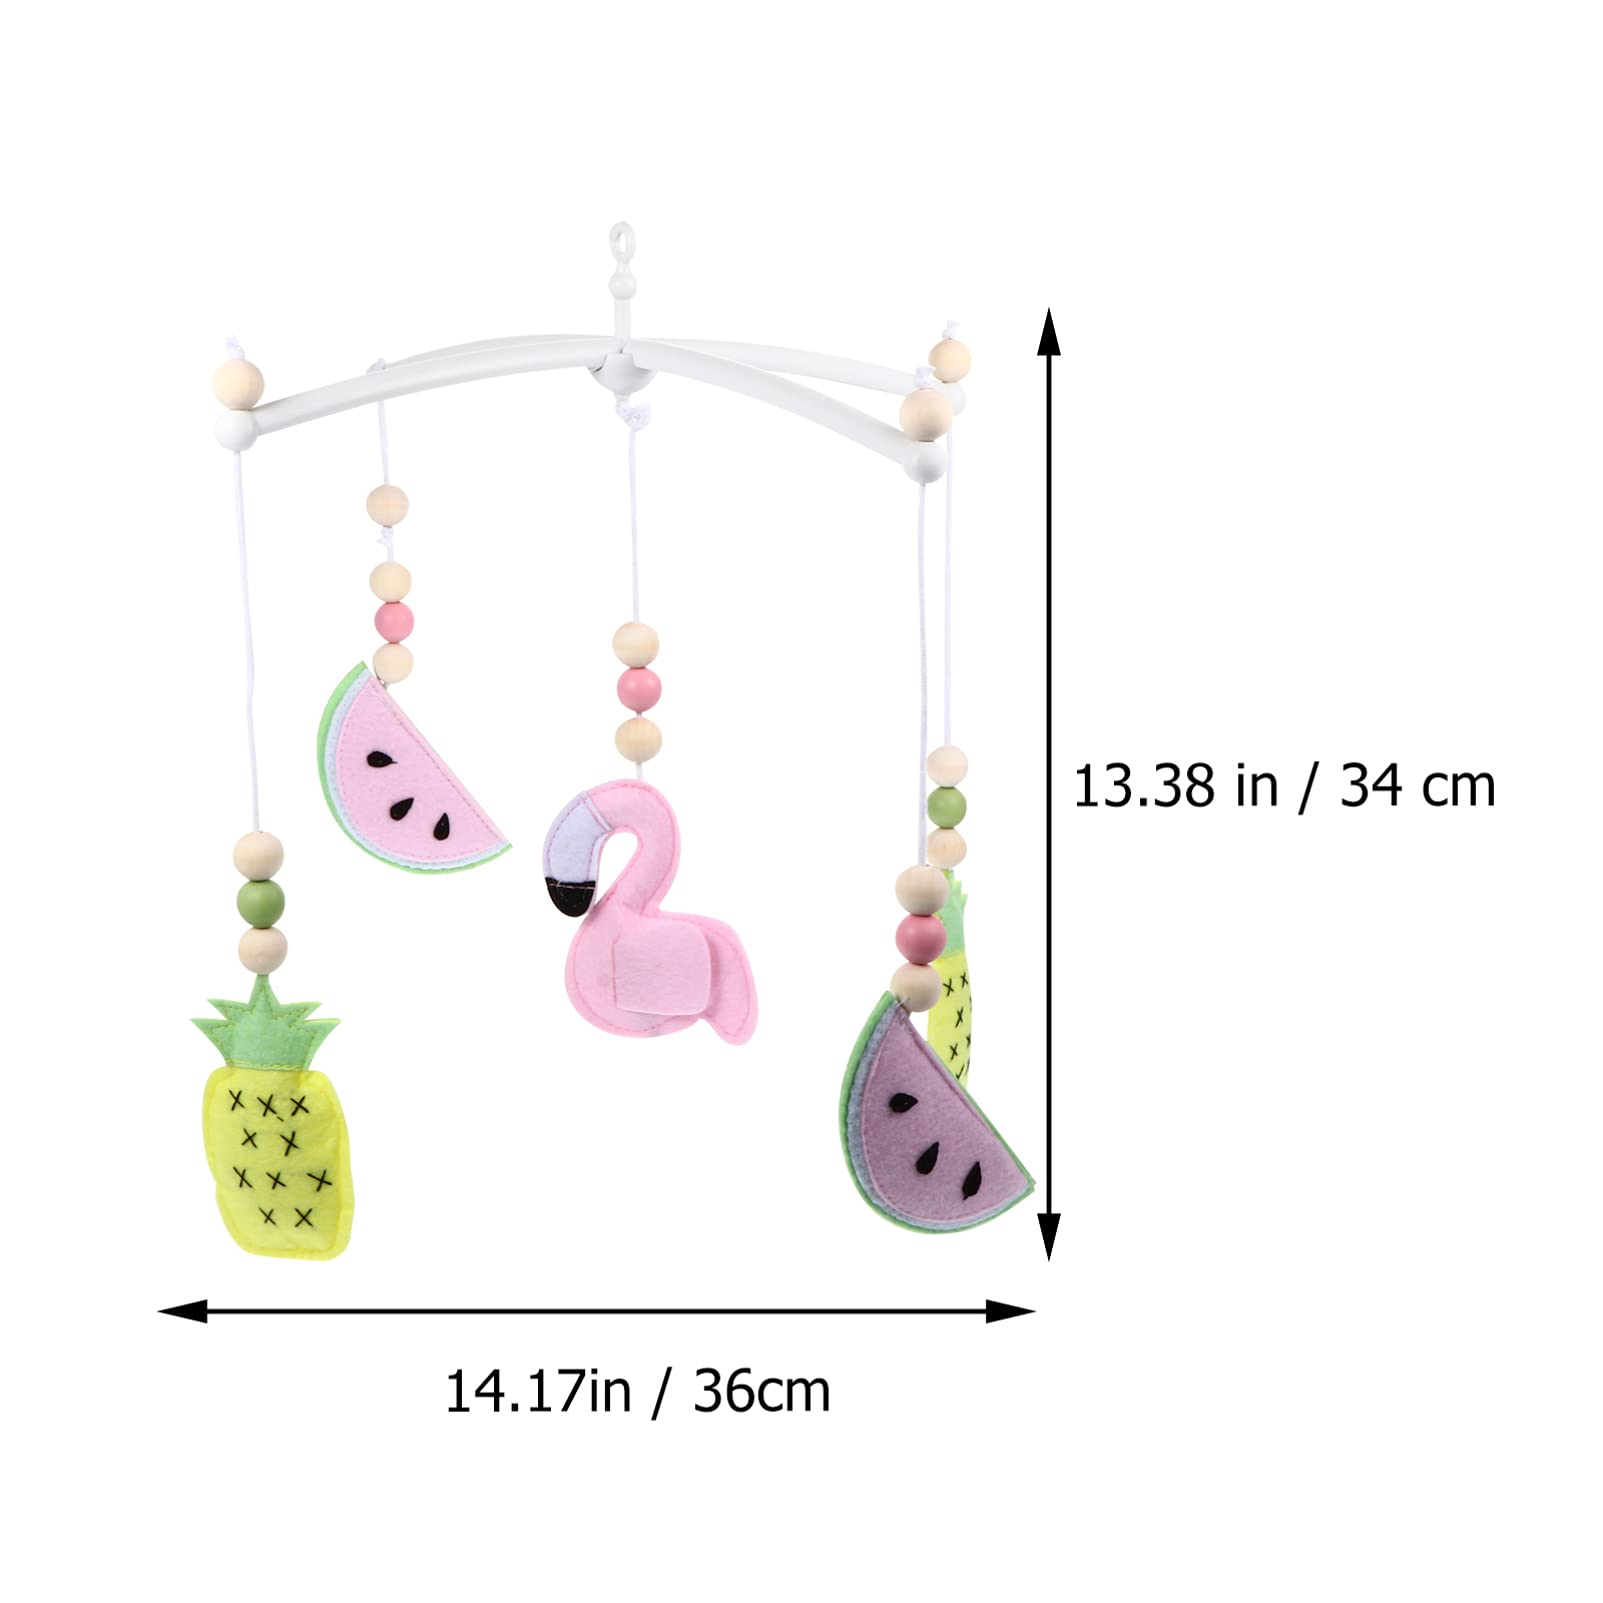 TOYANDONA Felt Baby Crib Mobile Flamingo Watermelon Hanging Car Seat Toy Wind Chime Nursery Decoration for Boys and Girls Baby Bedroom Ceiling Decor Mixed Color